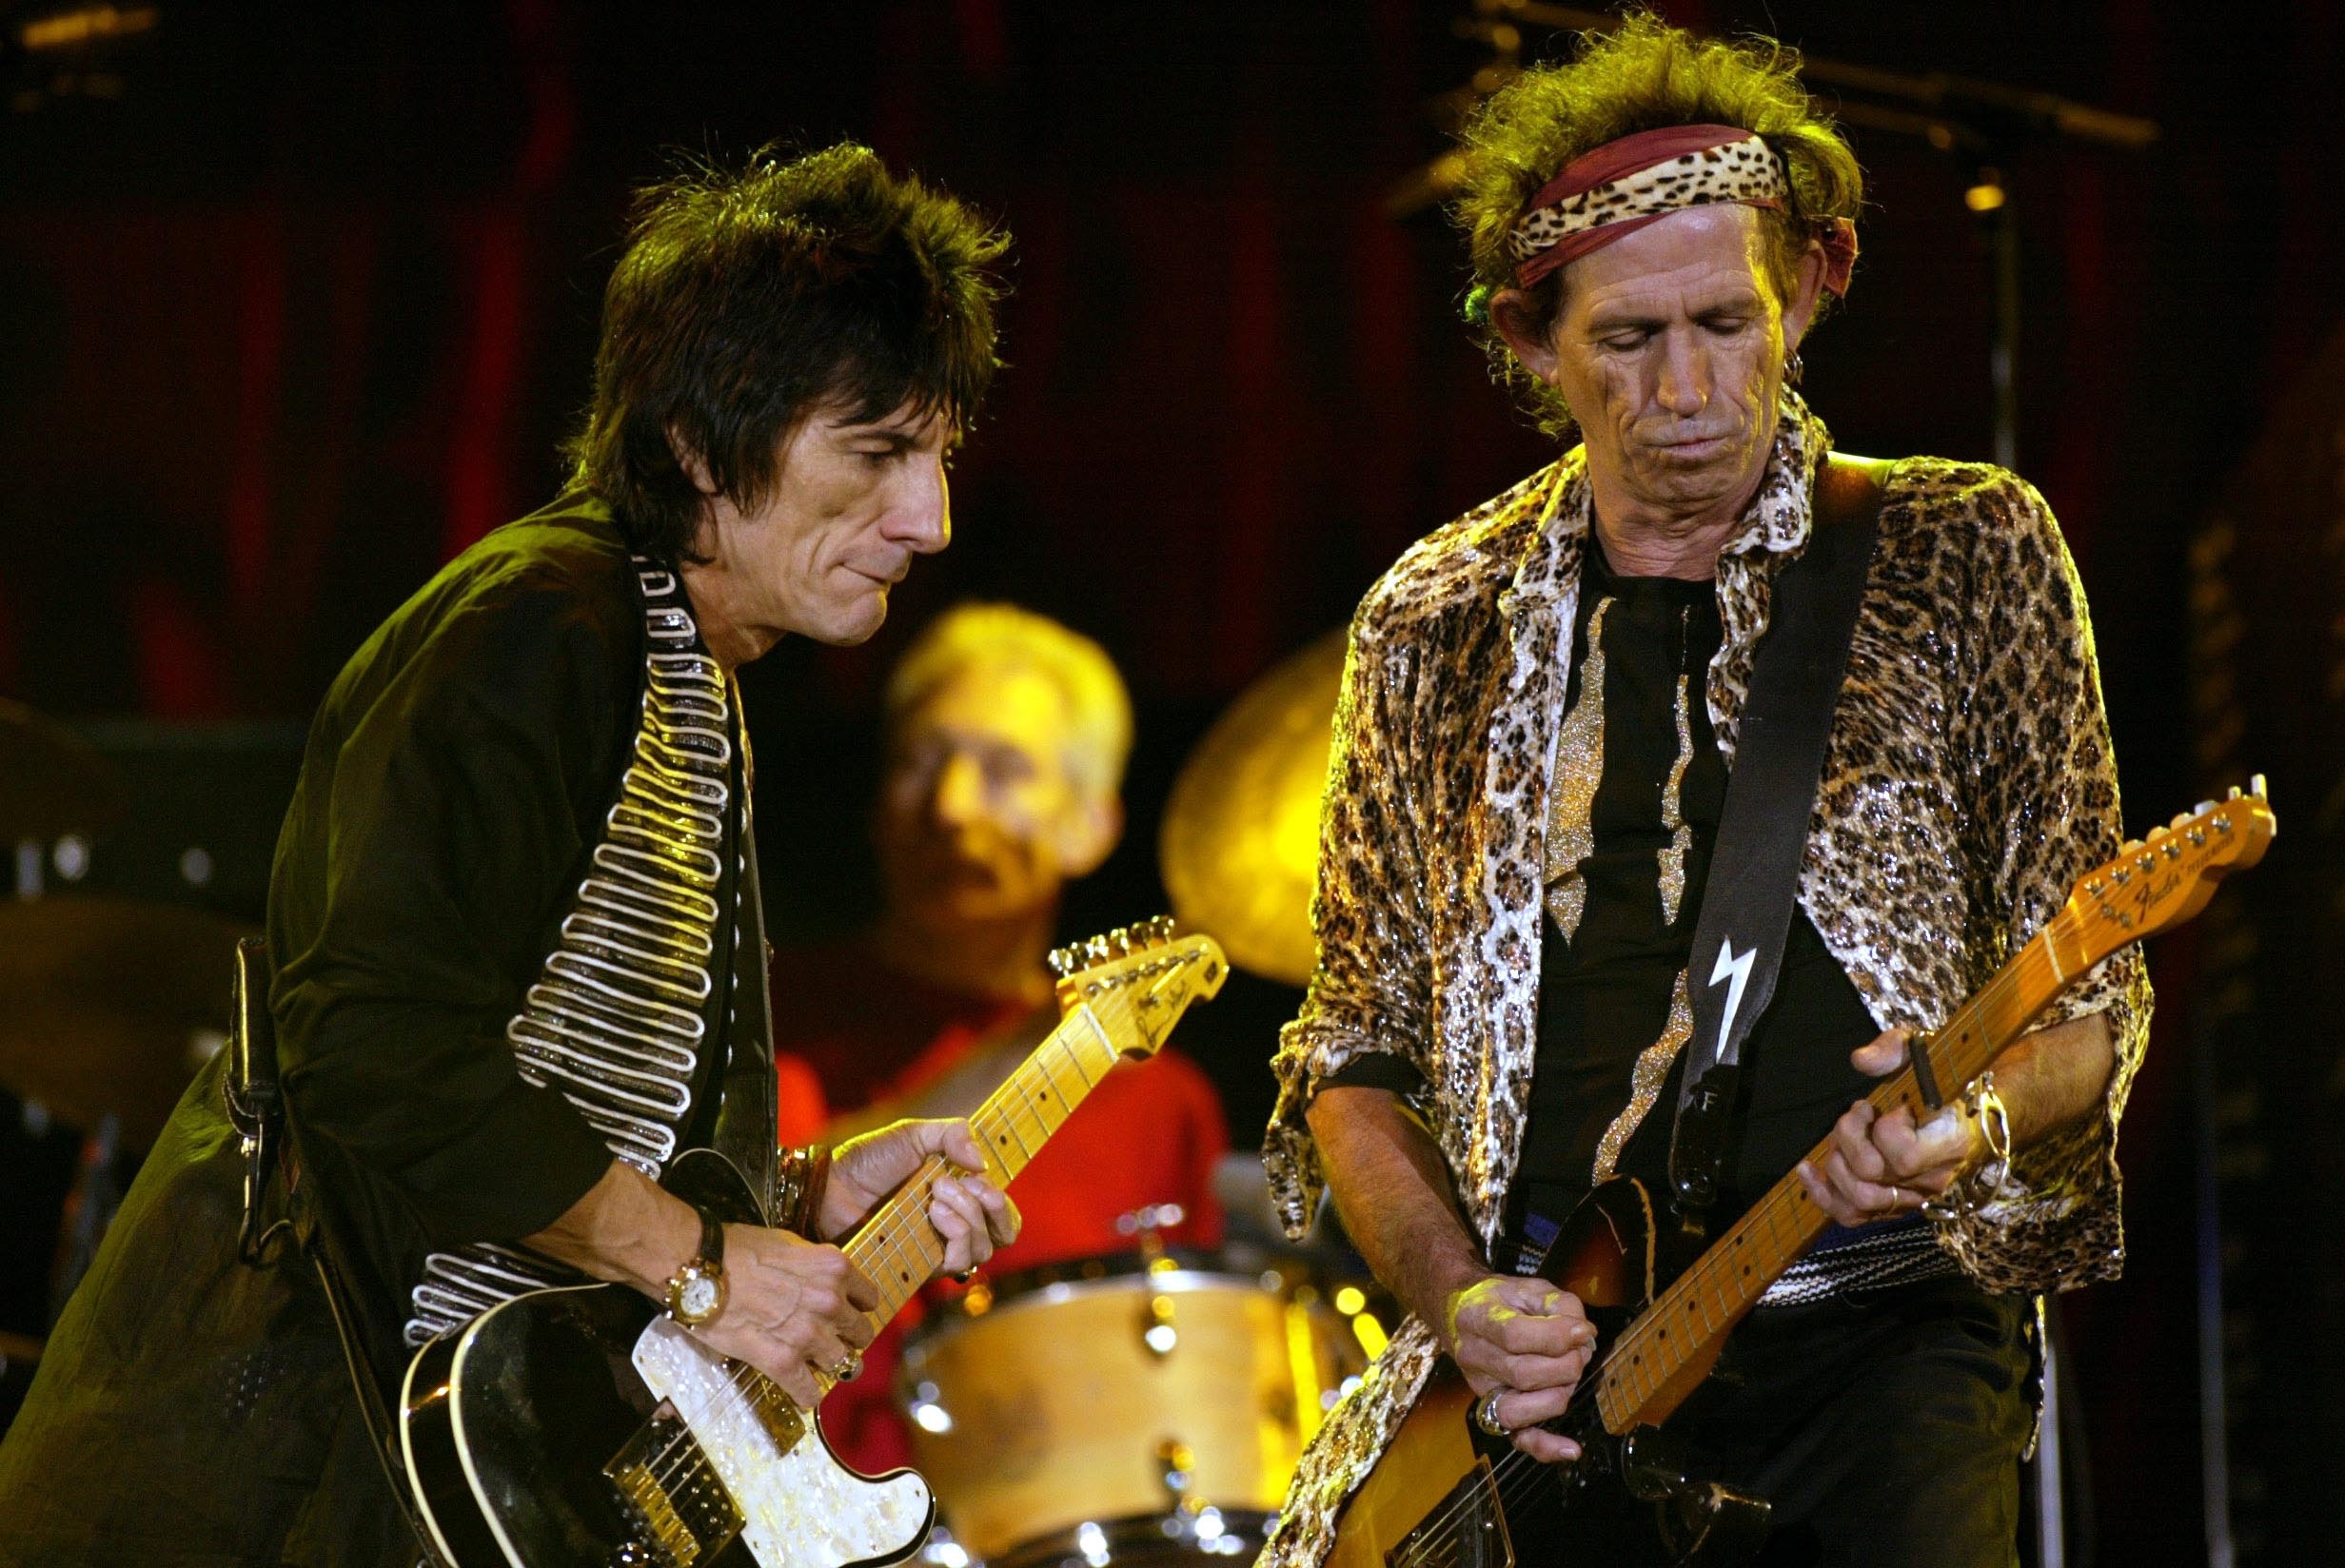 HD wallpaper, Music Interview, Keith Richards, Desktop Hd Keith Richards Wallpaper, 2470X1650 Hd Desktop, Guitar And Bass, Collaboration With Ronnie Wood